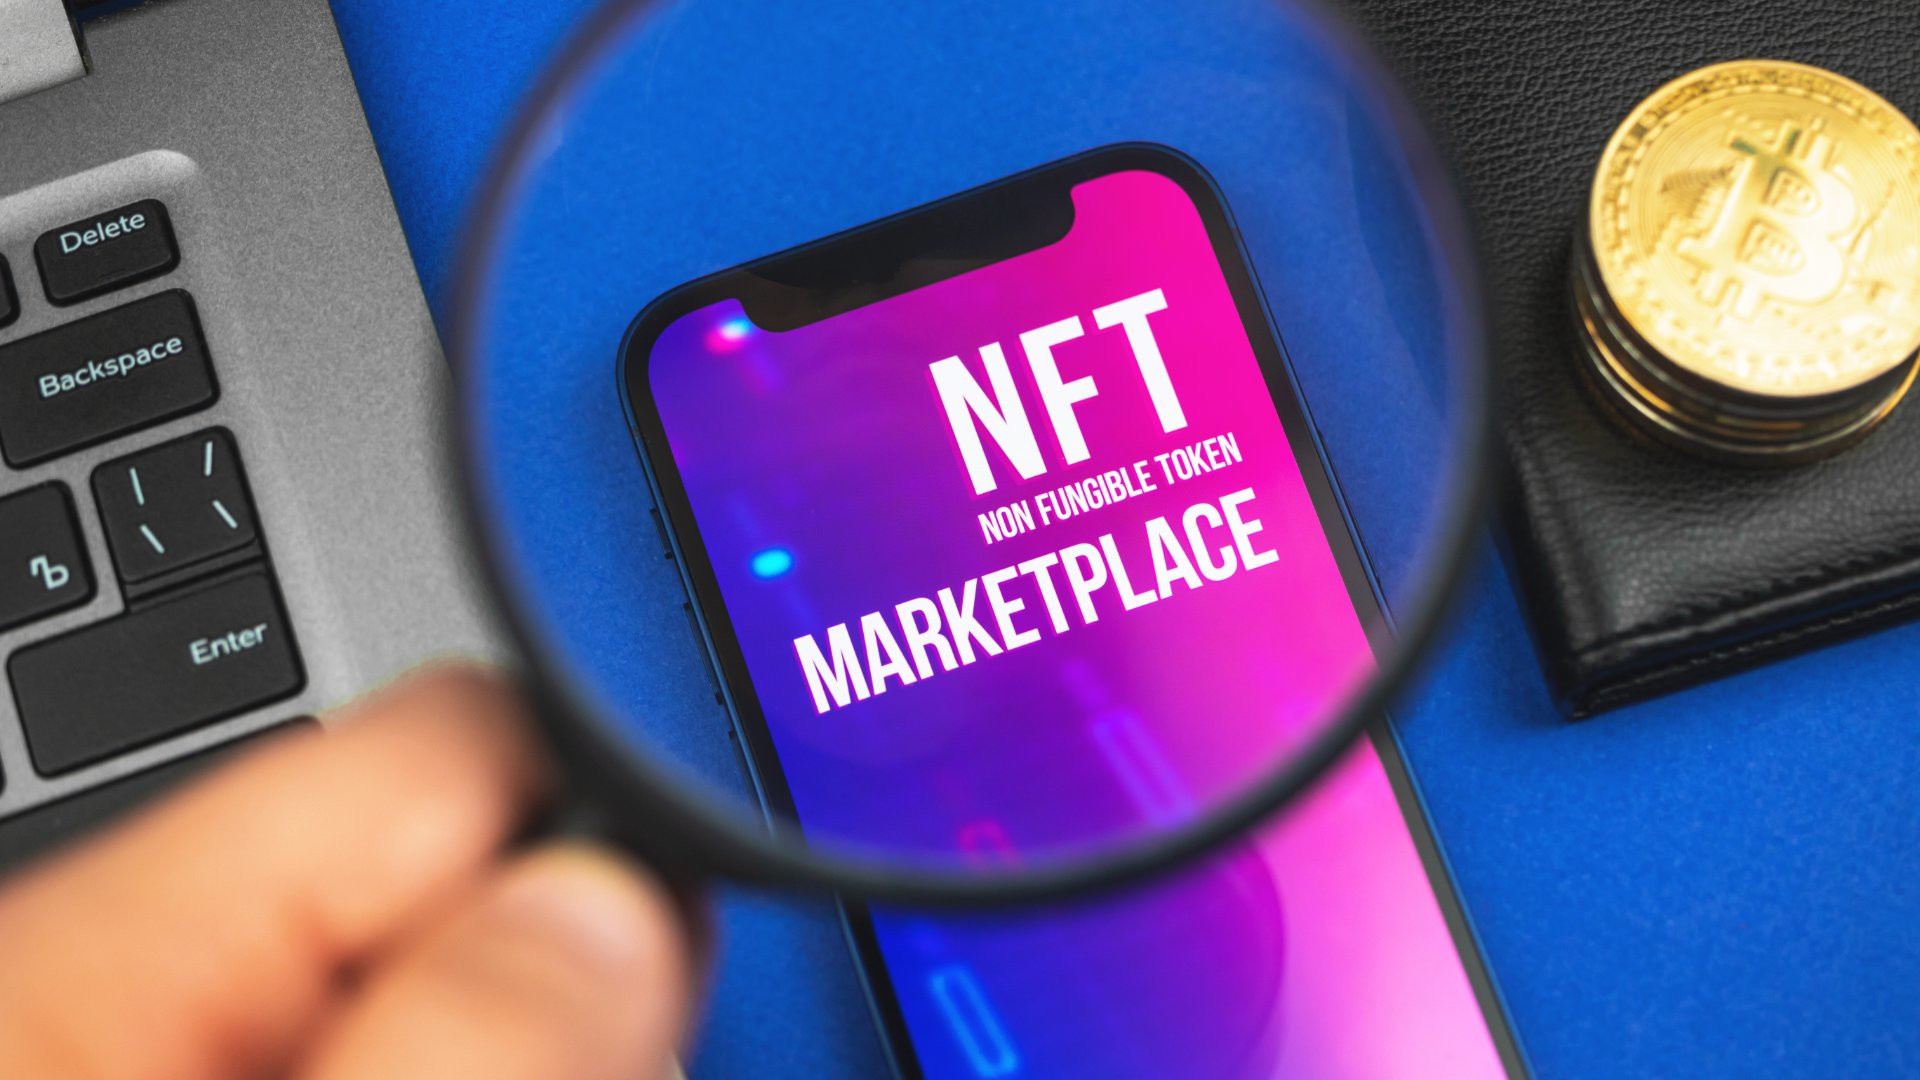 Three Emerging NFT Marketplaces You Do Not Want to Miss: Binance (BNB), Big Eyes (BIG), and Solana (SOL)